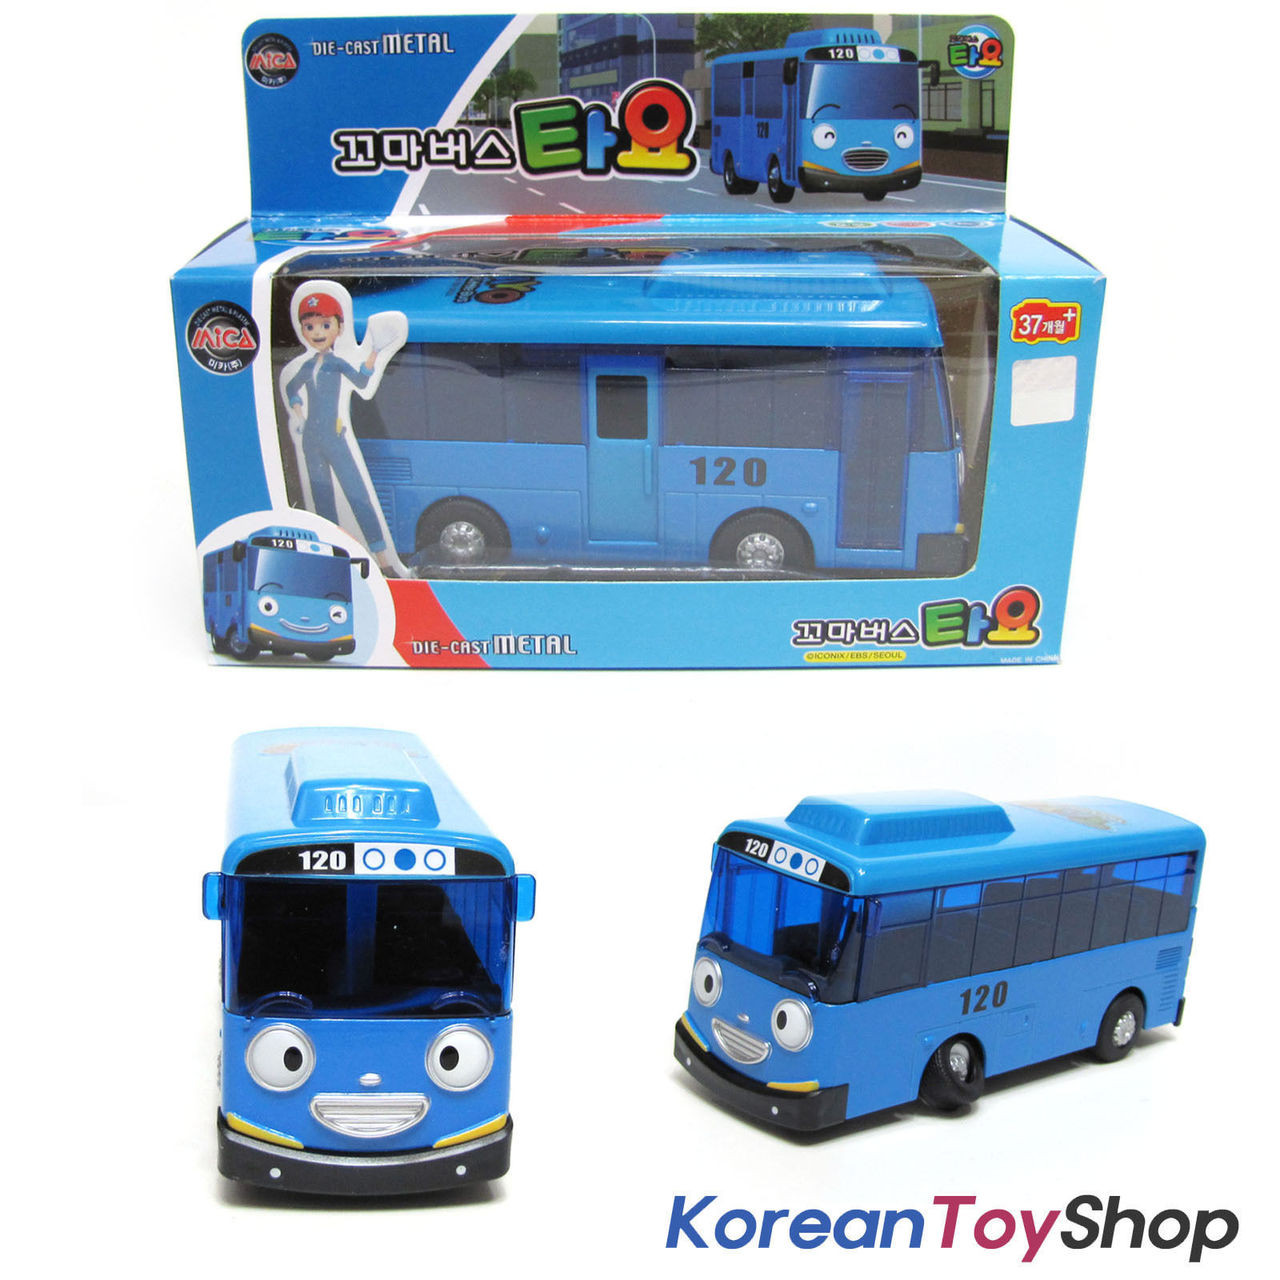 little toy bus